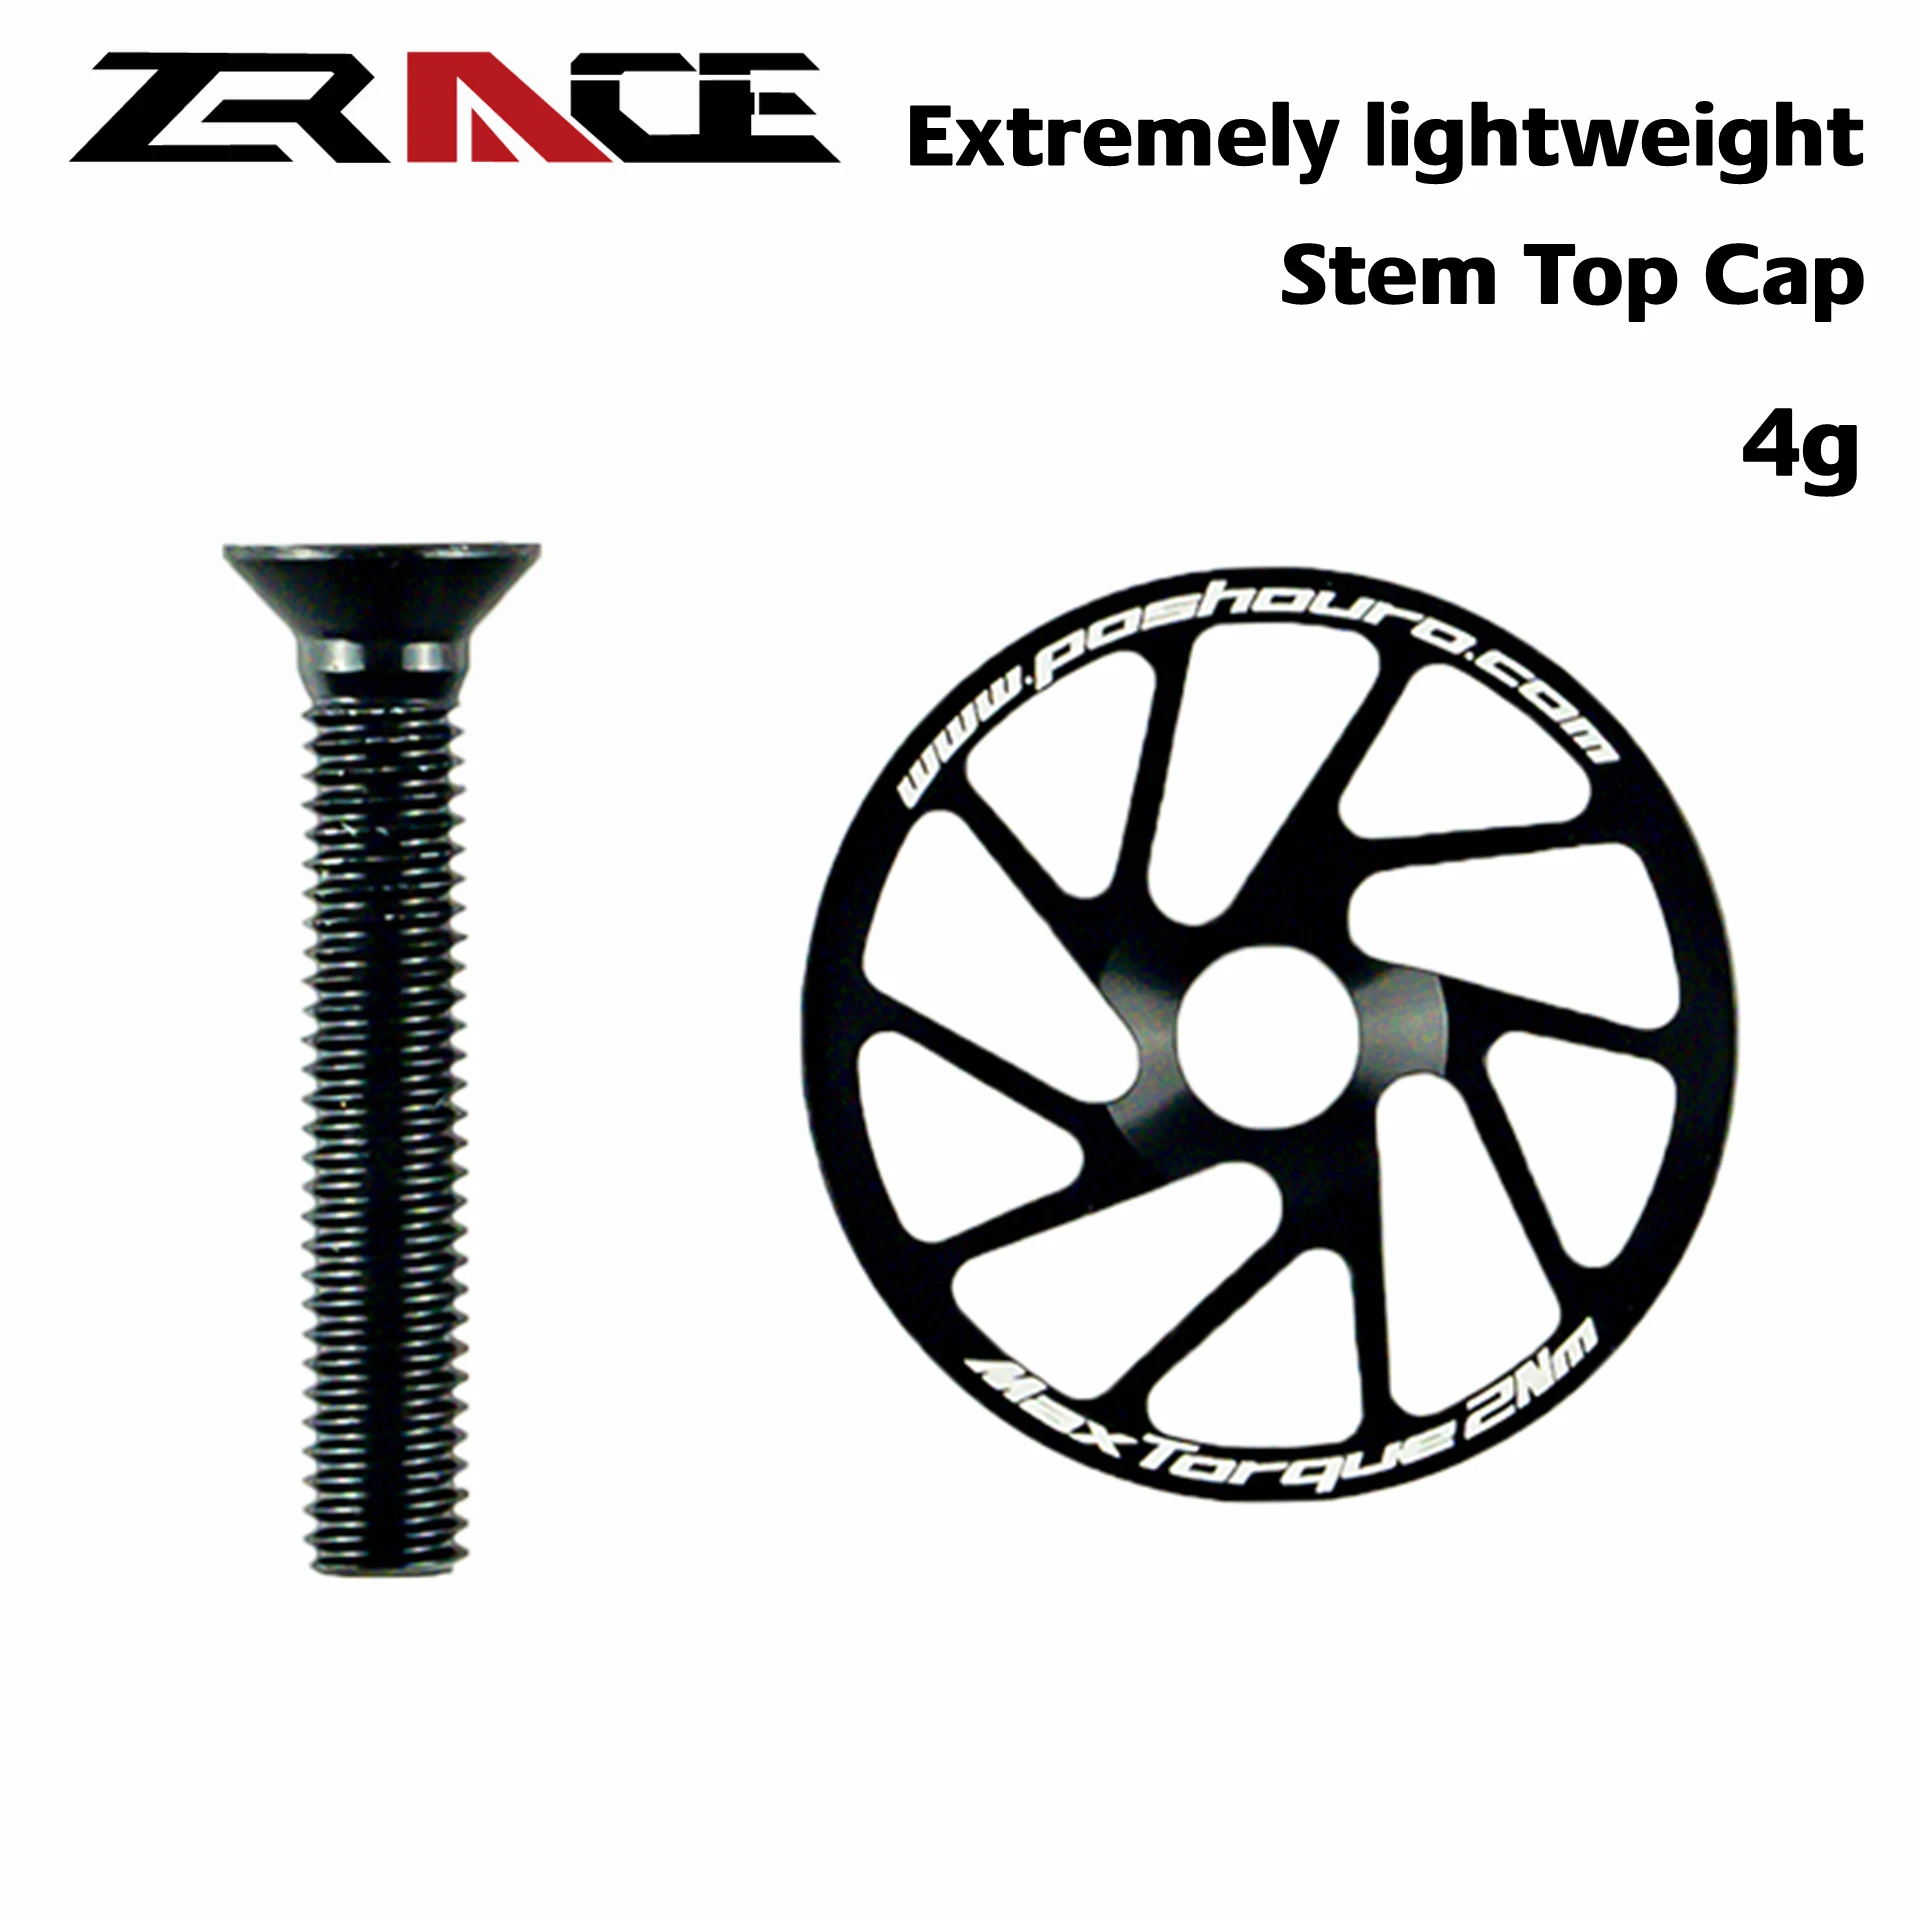 

ZRACE 4g Extremely lightweight Bicycle Stem / Headset Top Cap with Screw Headset Cover,Titanium alloy screw, Extremely light